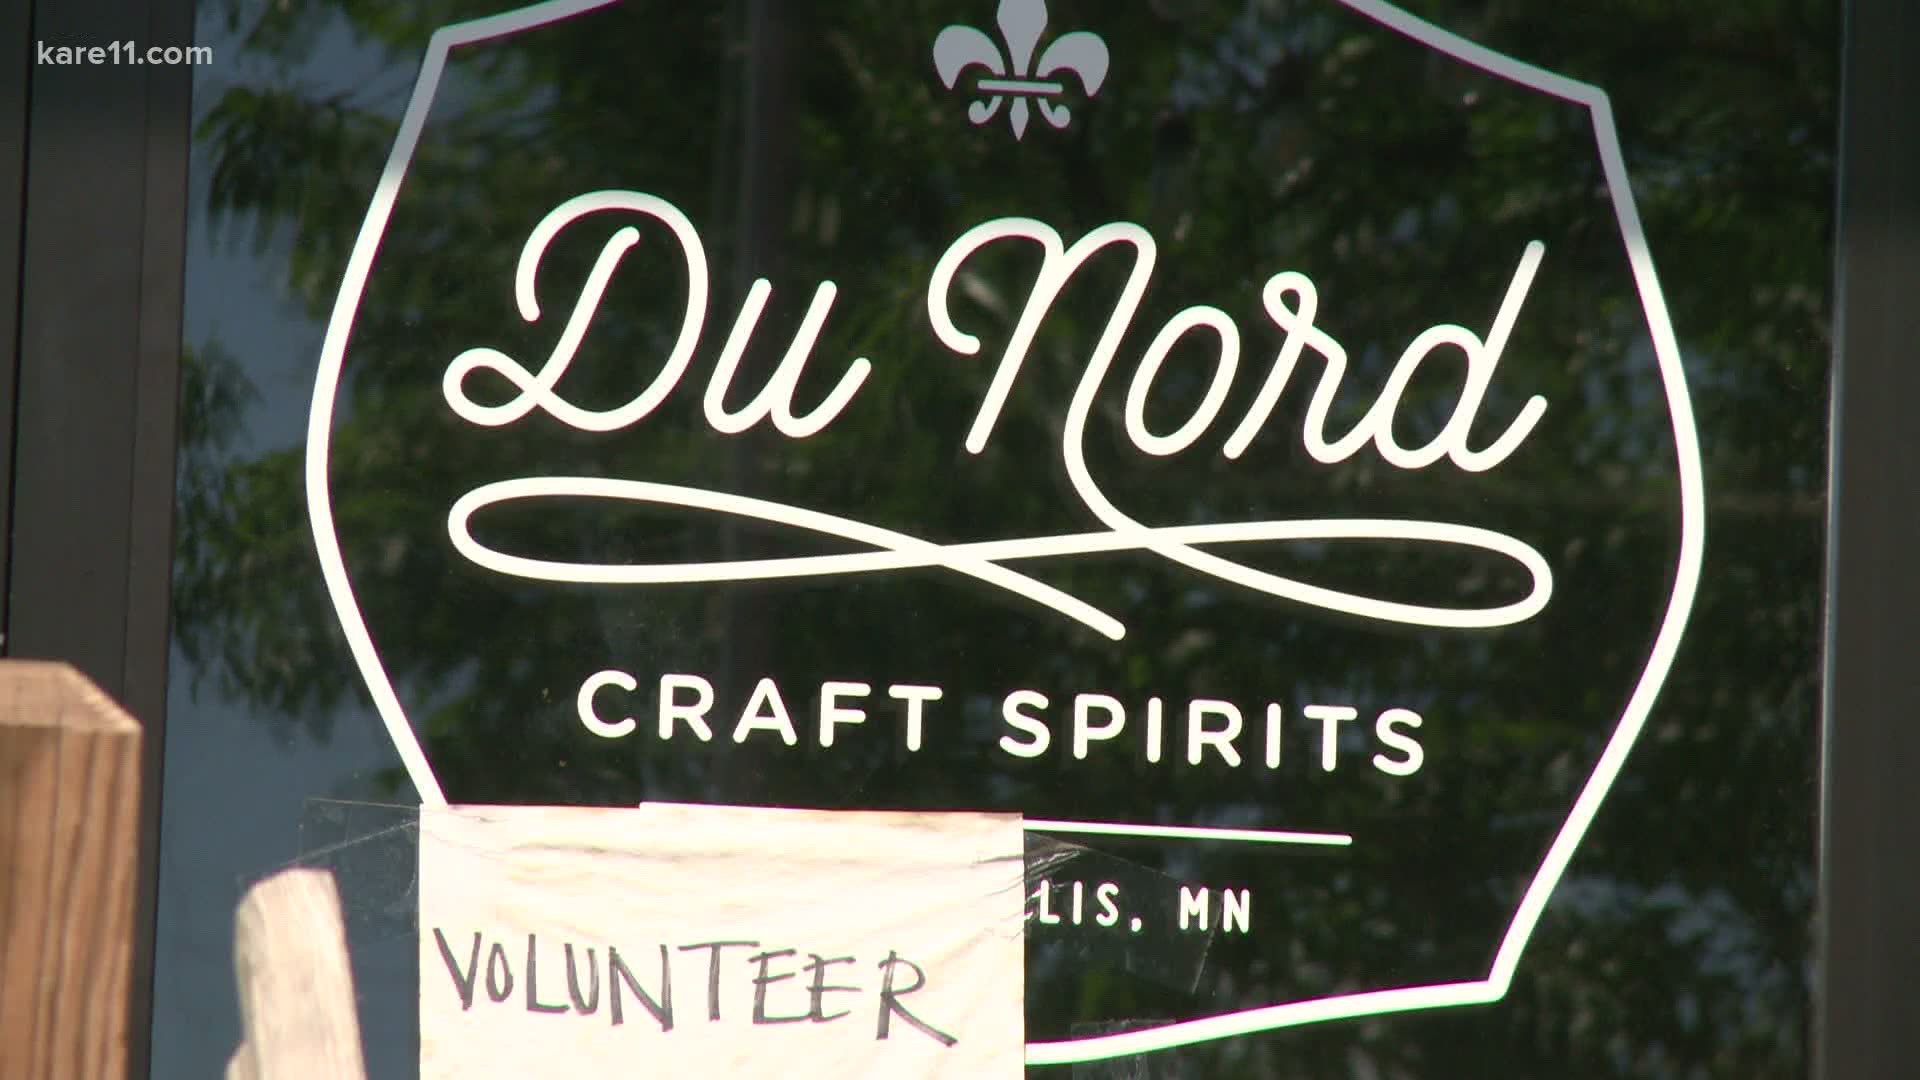 From a food pantry to a fundraiser, 'Du Nord' puts community first